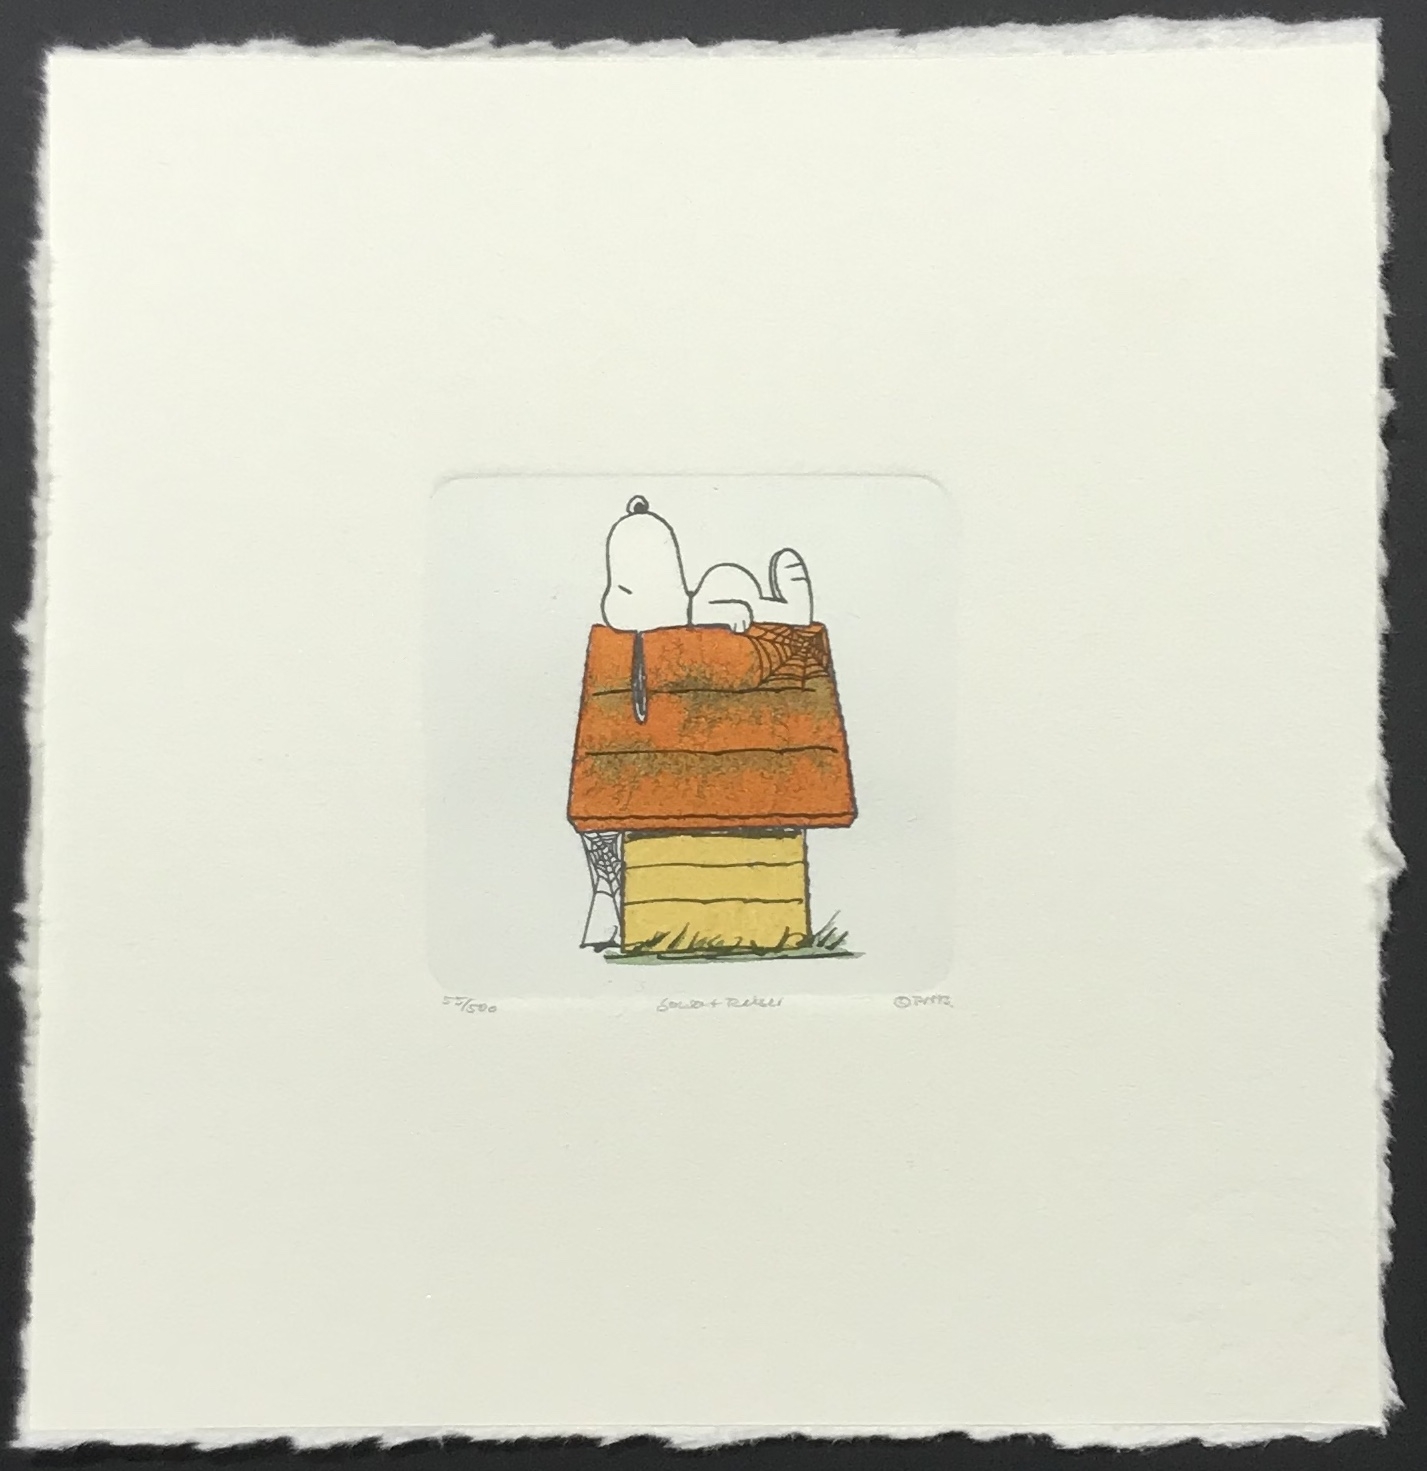 Snoopy On Doghouse Night Snoopy On Doghouse Night Item Pe2122 Hand Painted Etchings Sowa And Reiser Us Dollars Shop In Cdn Dollars Unframed Add To Cart Learn About Our Framing Product Description Snoopy Rests On Top Of His Doghouse In The